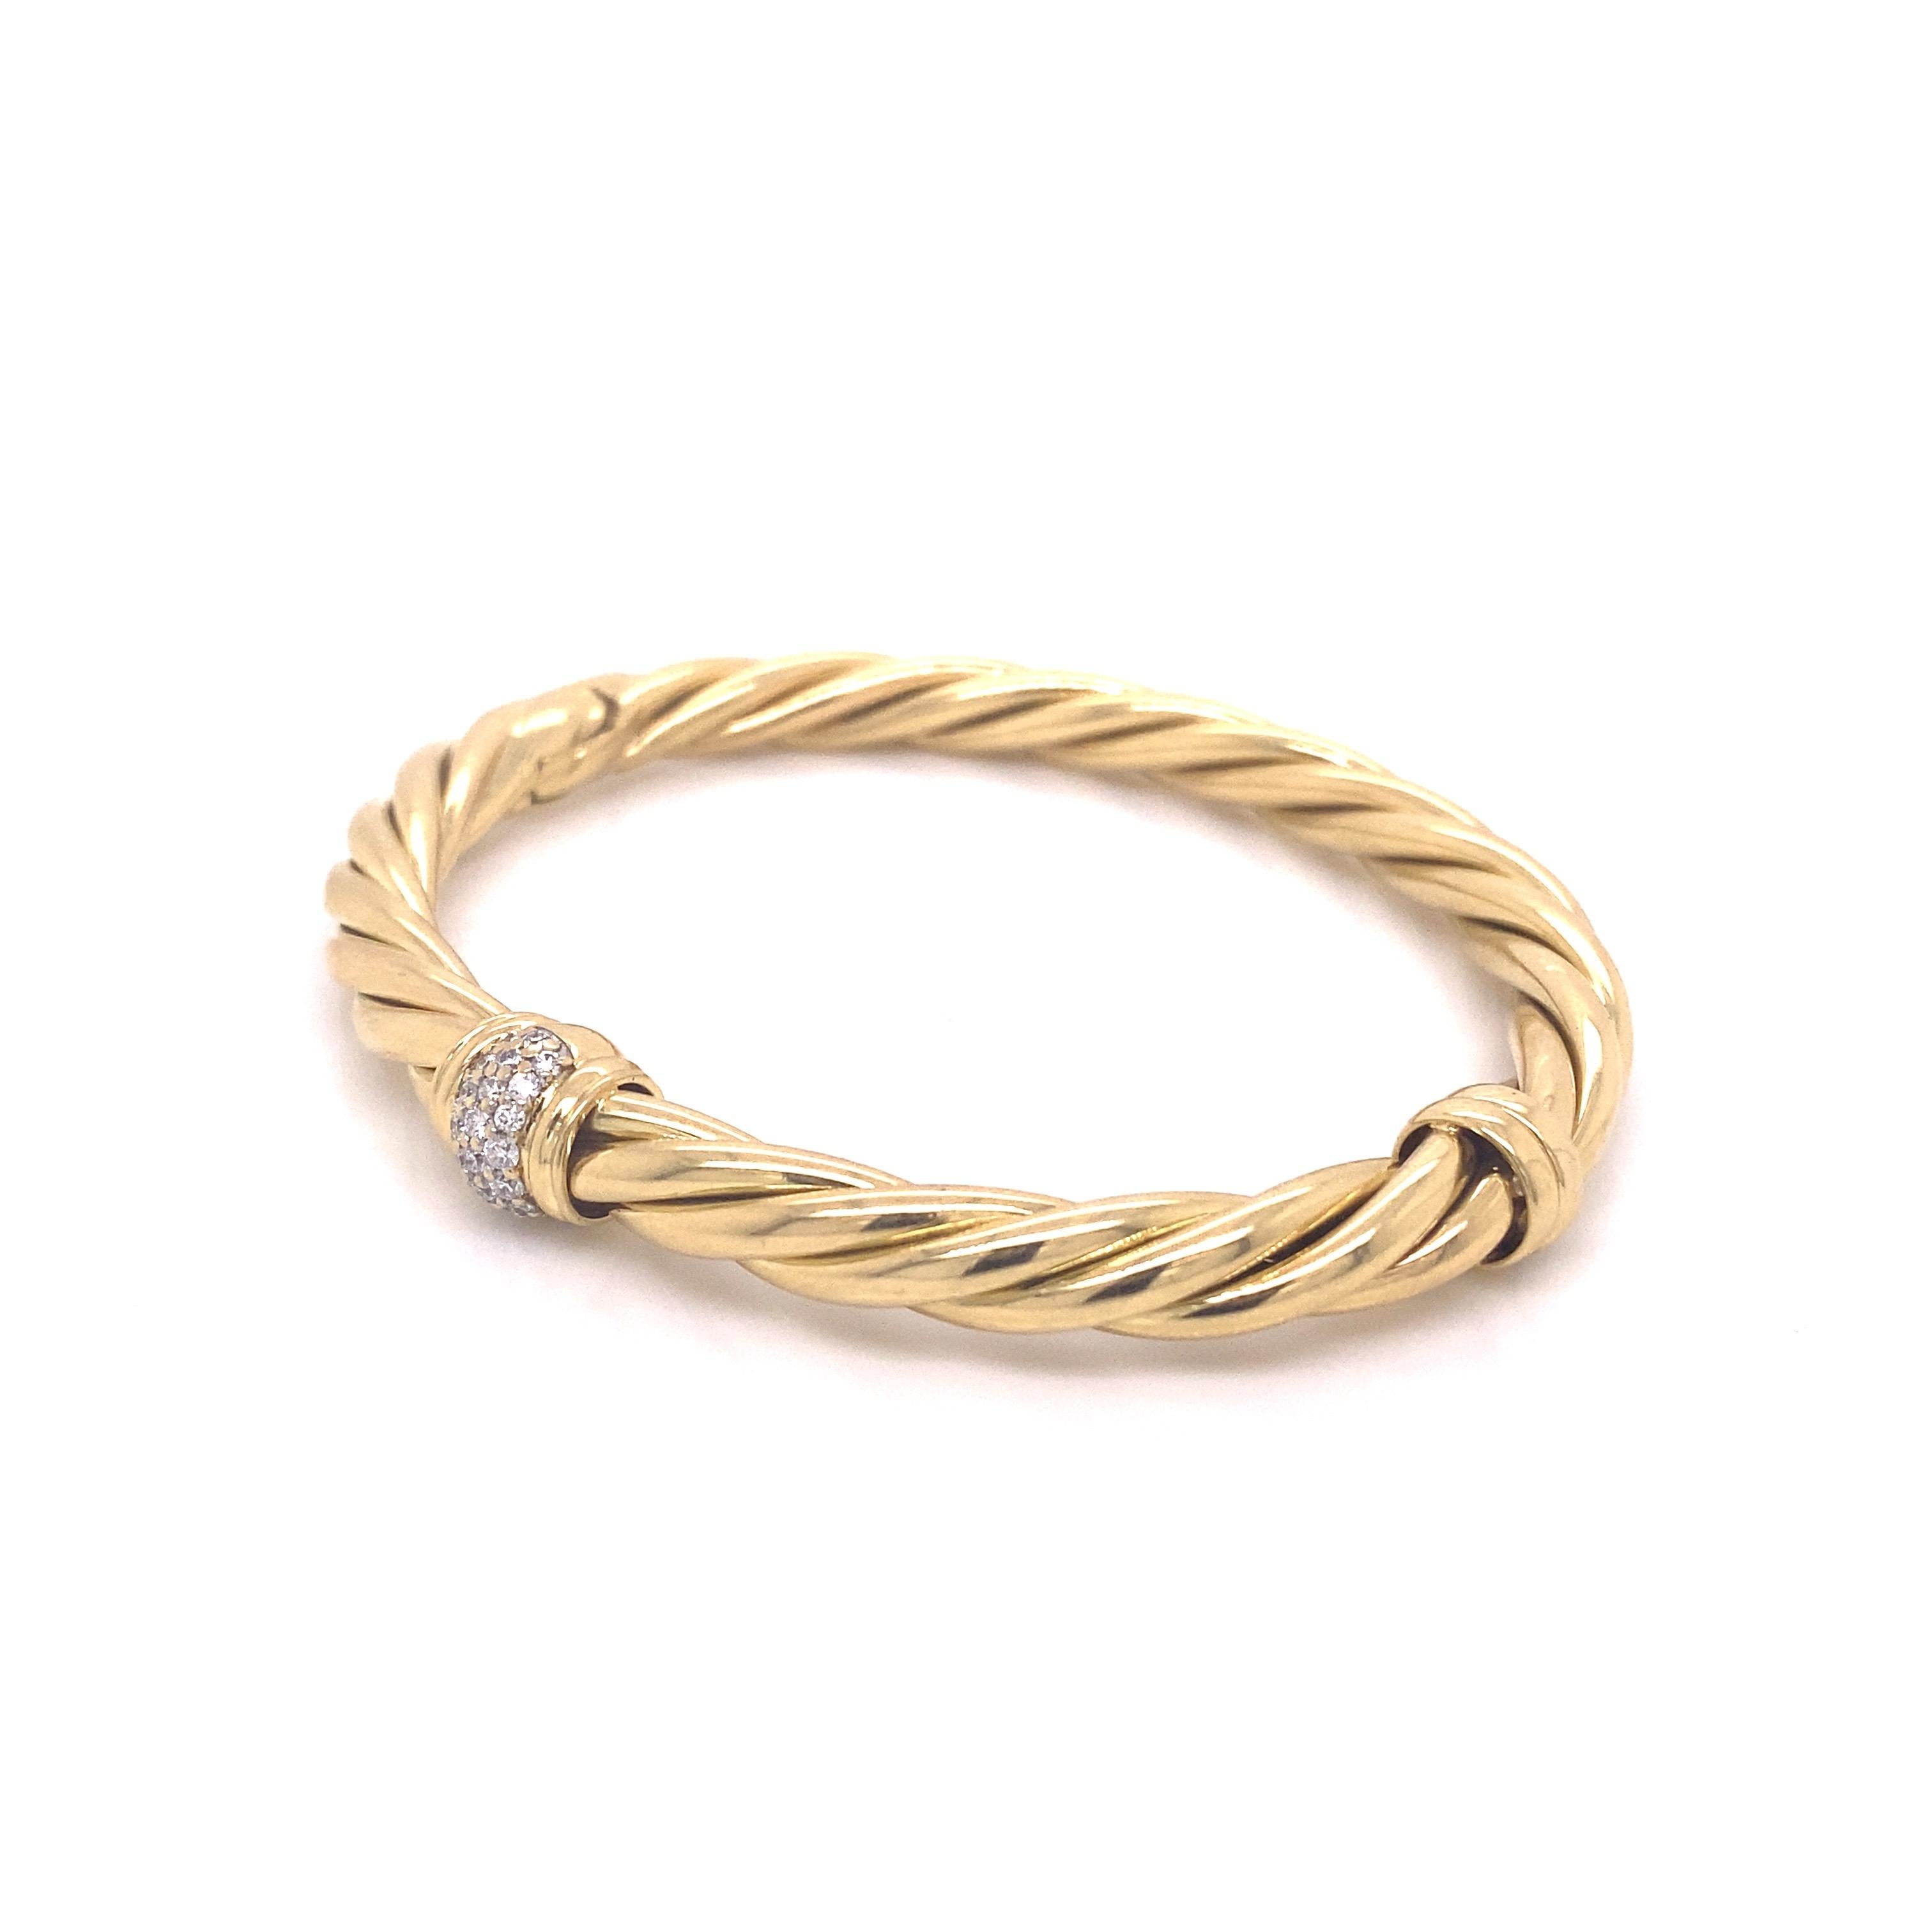 This classic cable bracelet from David Yurman is crafted from 18 karat yellow gold and features a .37ctw pave station at the center with a hinge closure. This is a size medium and will fit up to a 6.5